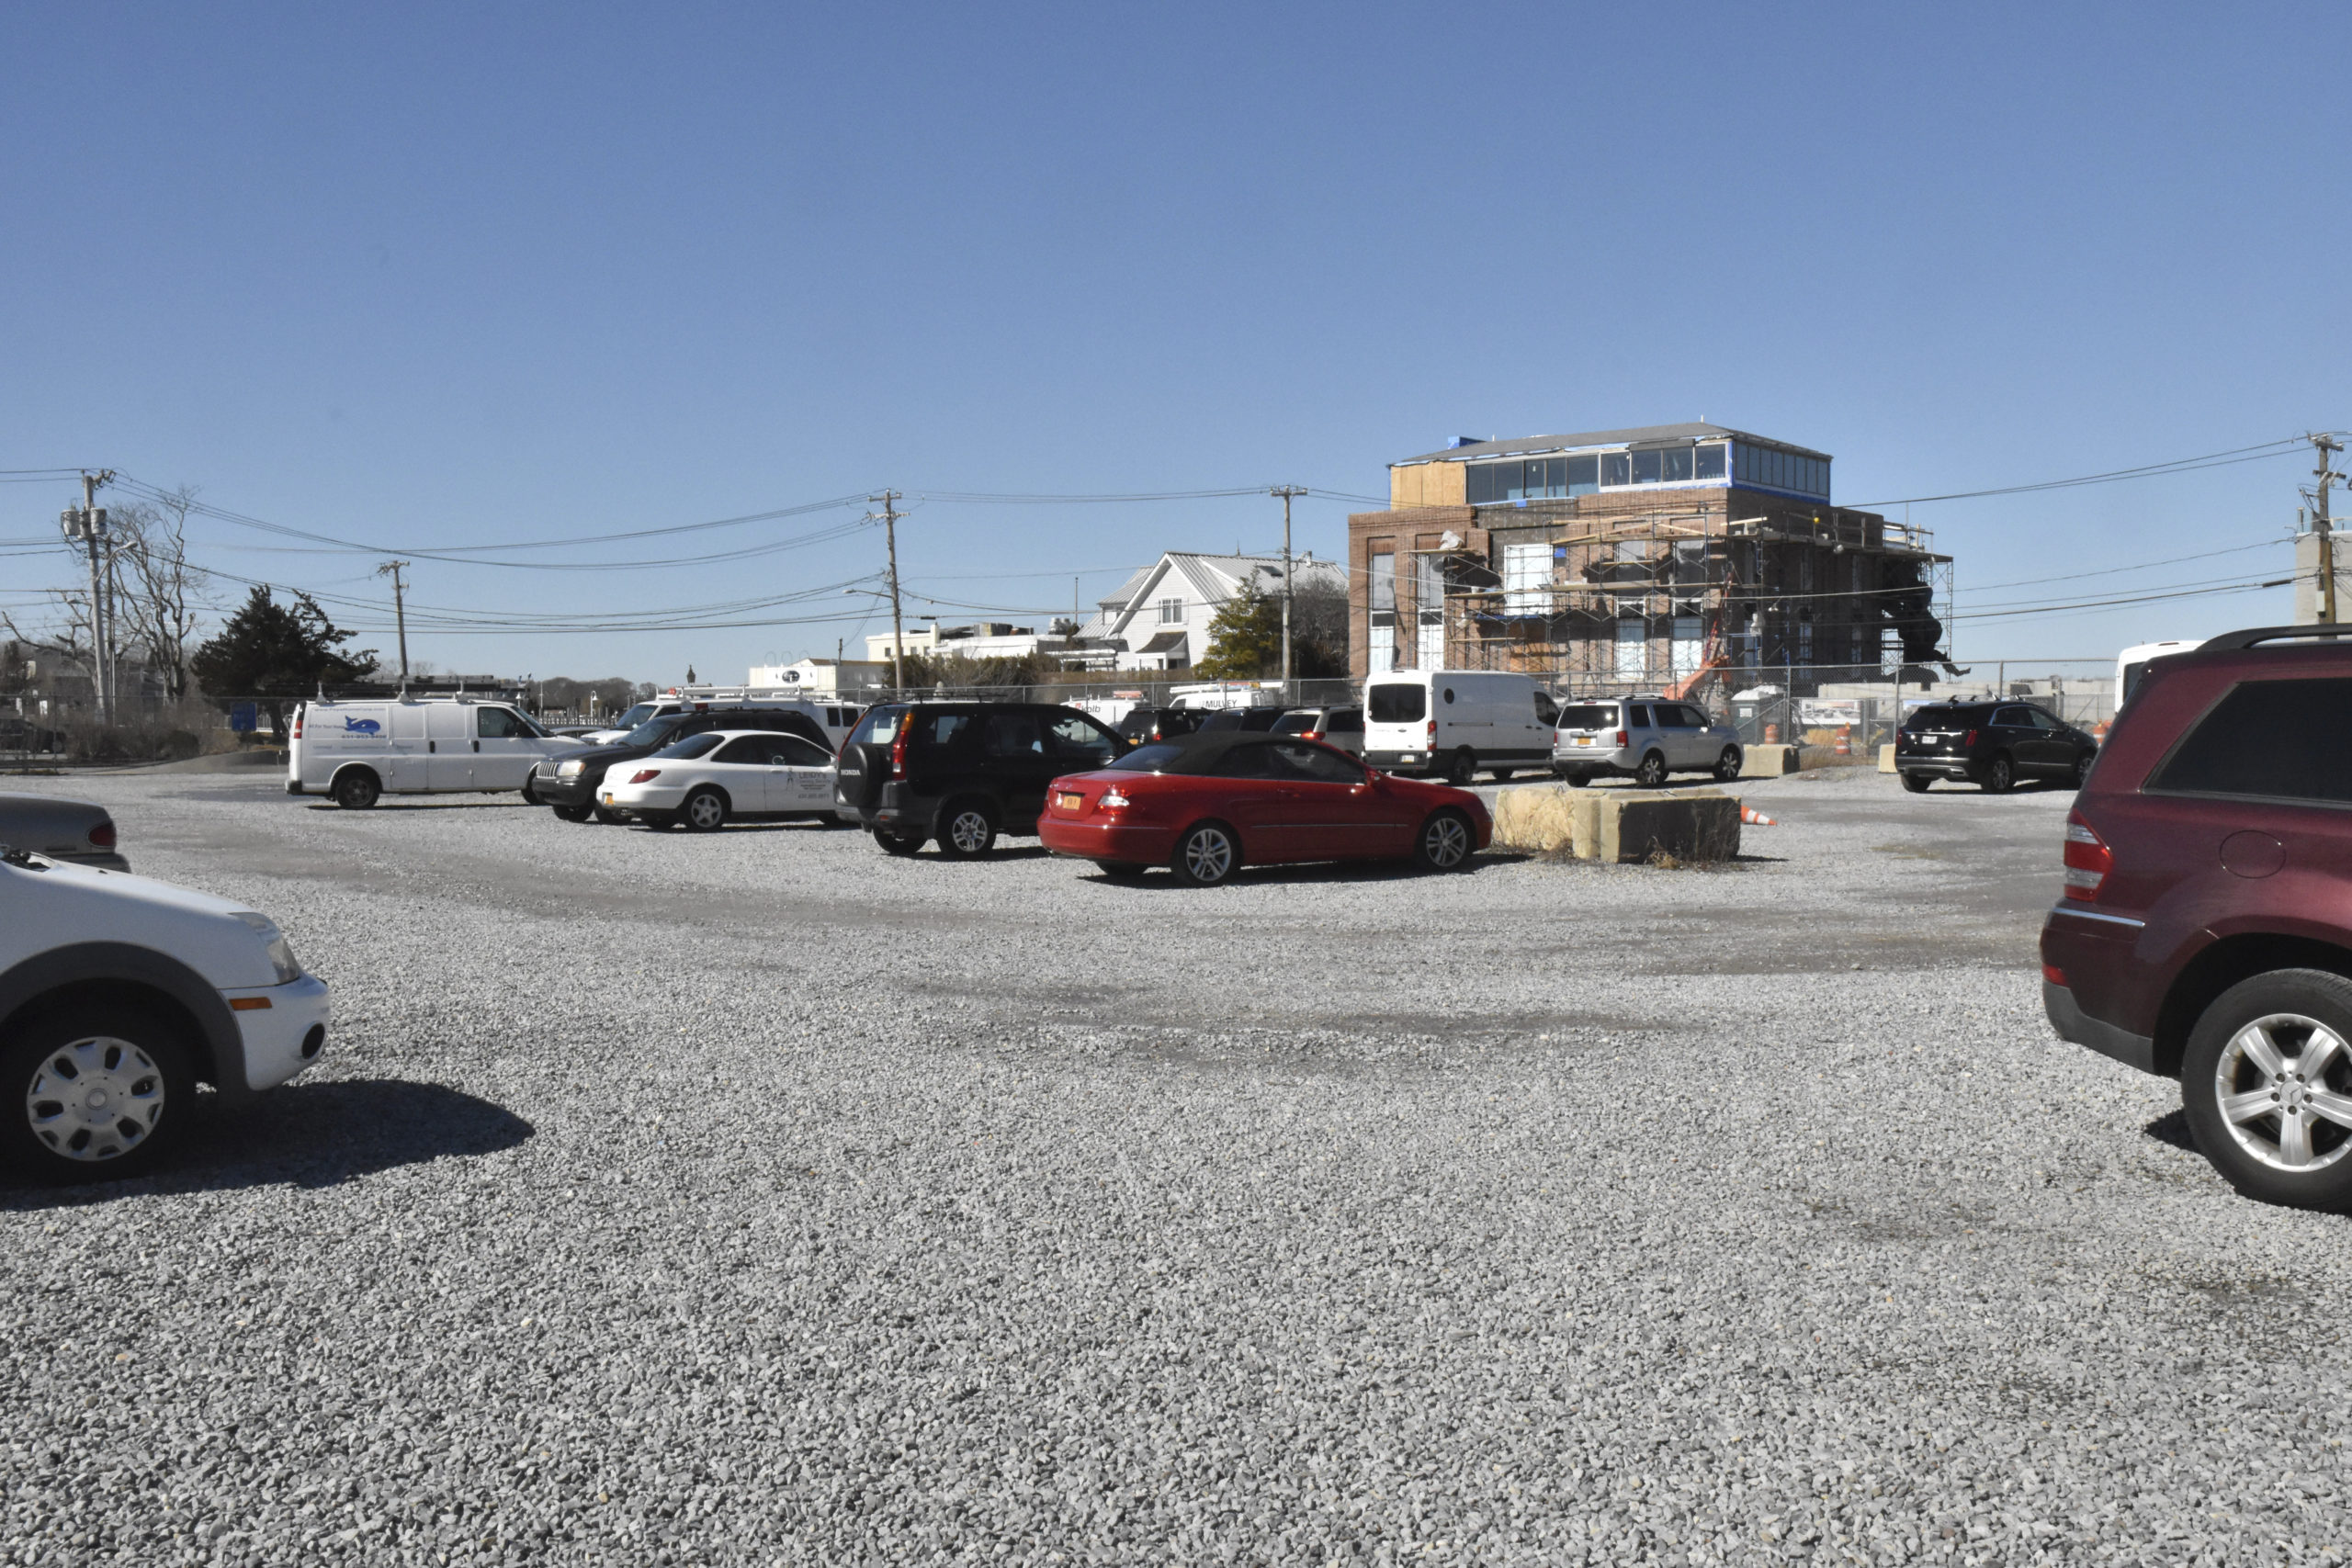 Sag Harbor Village’s bid to obtain a long-term lease on what is commonly called the gas ball parking lot at the corner of Long Island Avenue and Bridge Streets has been rejected by National Grid in favor of a higher offer from Friends of Bay Street.    STEPHEN J. KOTZ